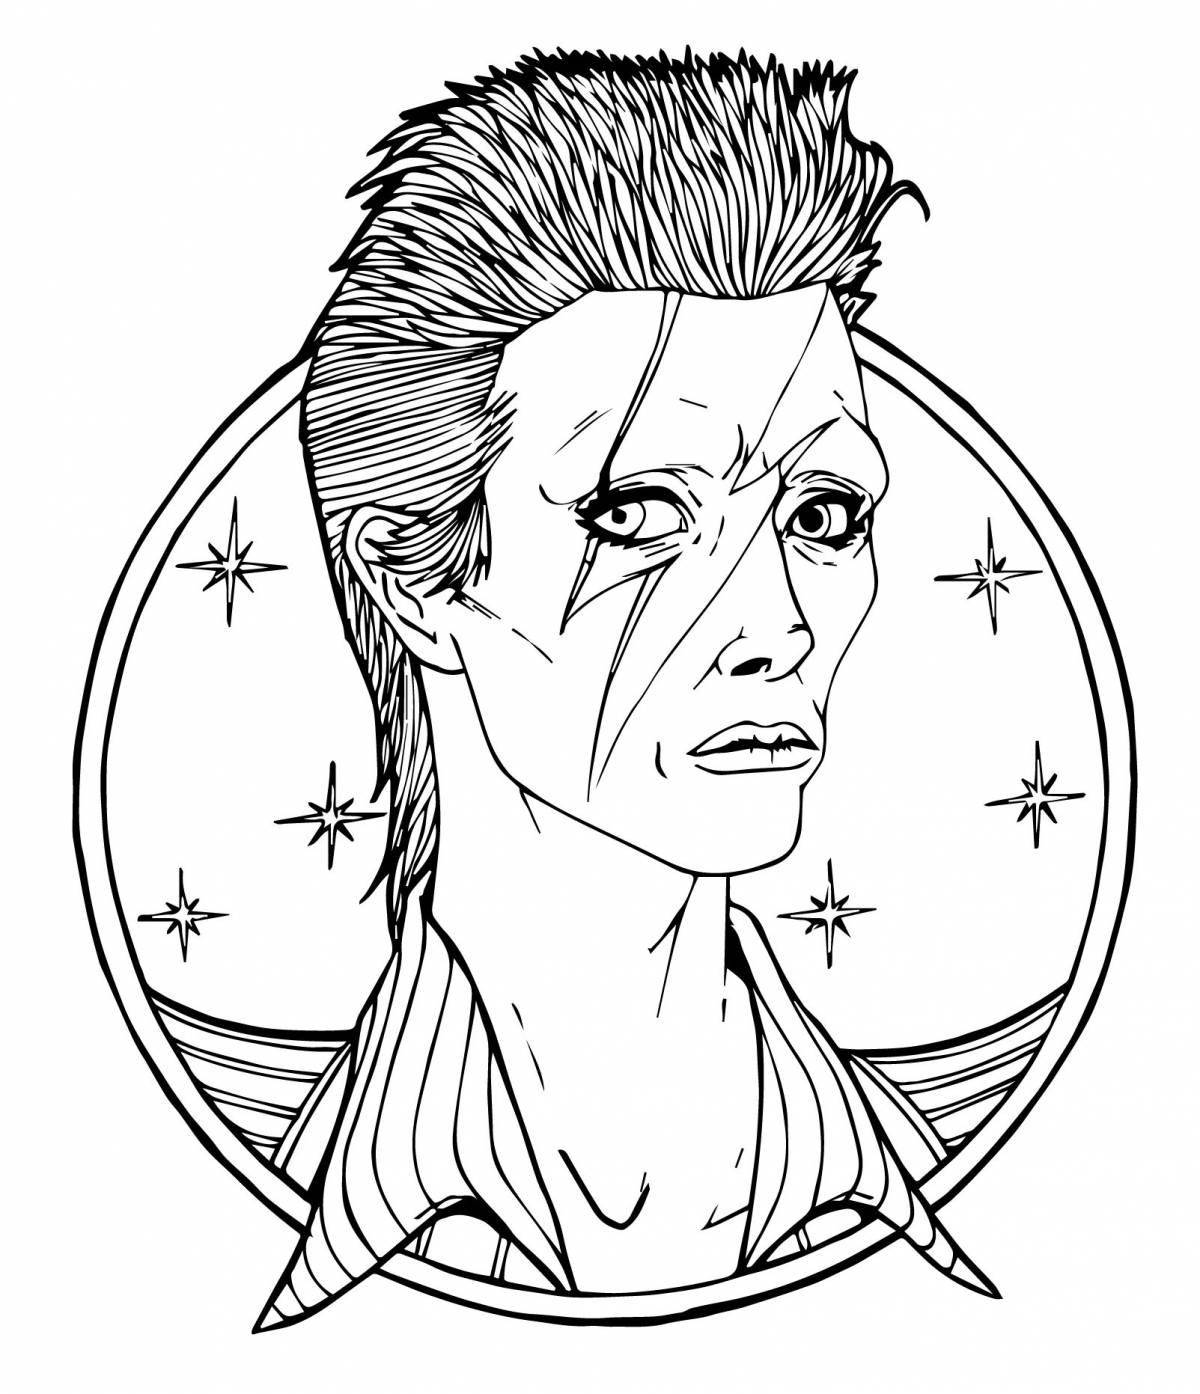 Celebrity humorous coloring pages